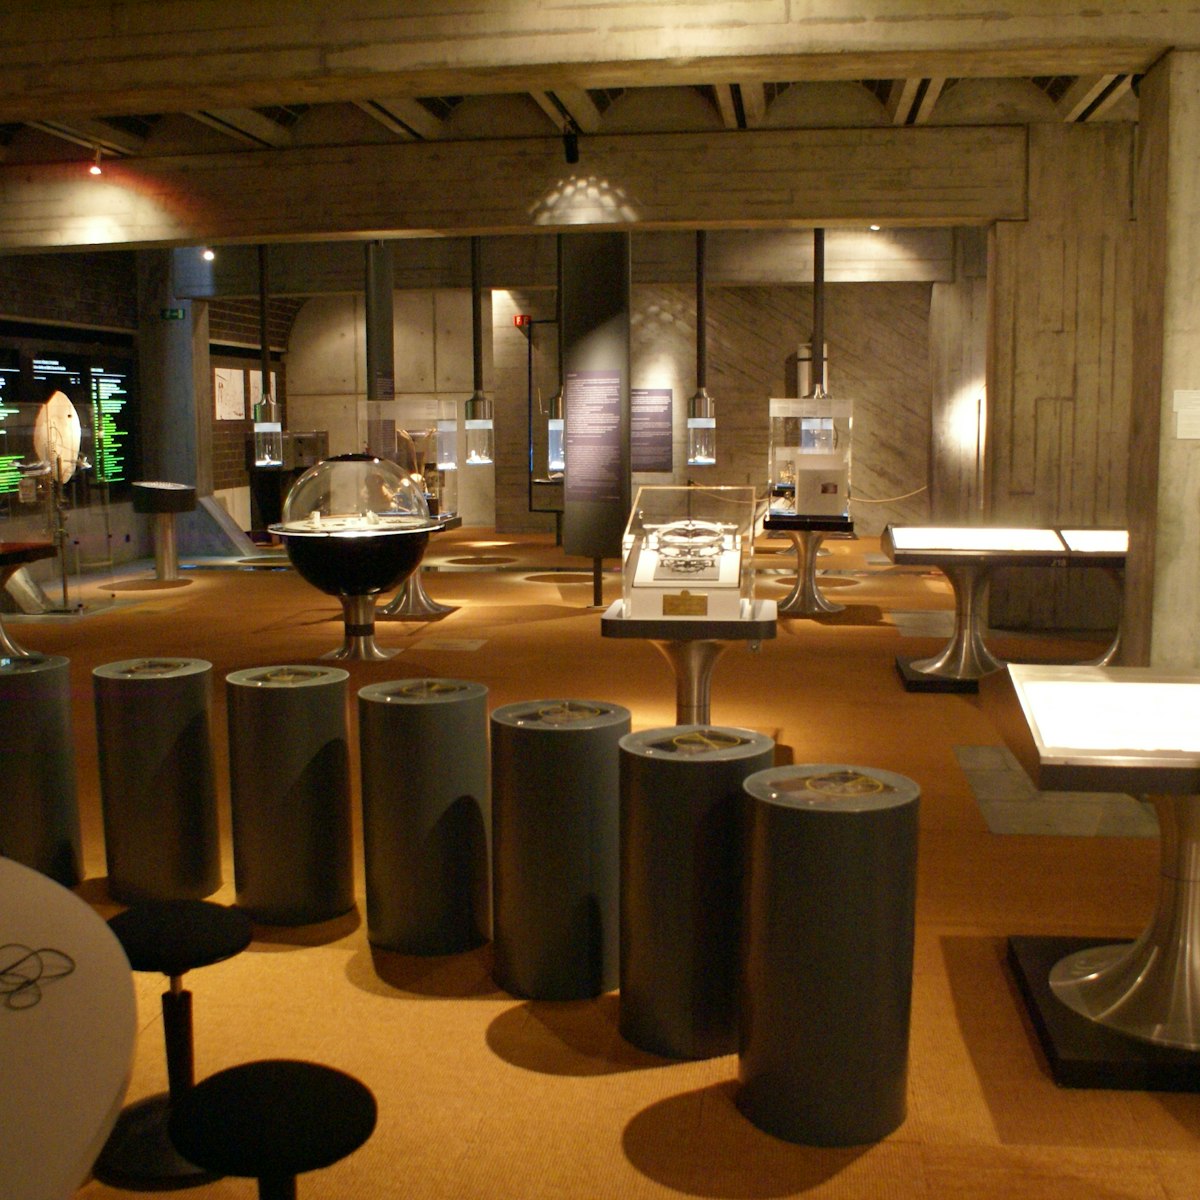 Interior of the Museum of Watchmaking.